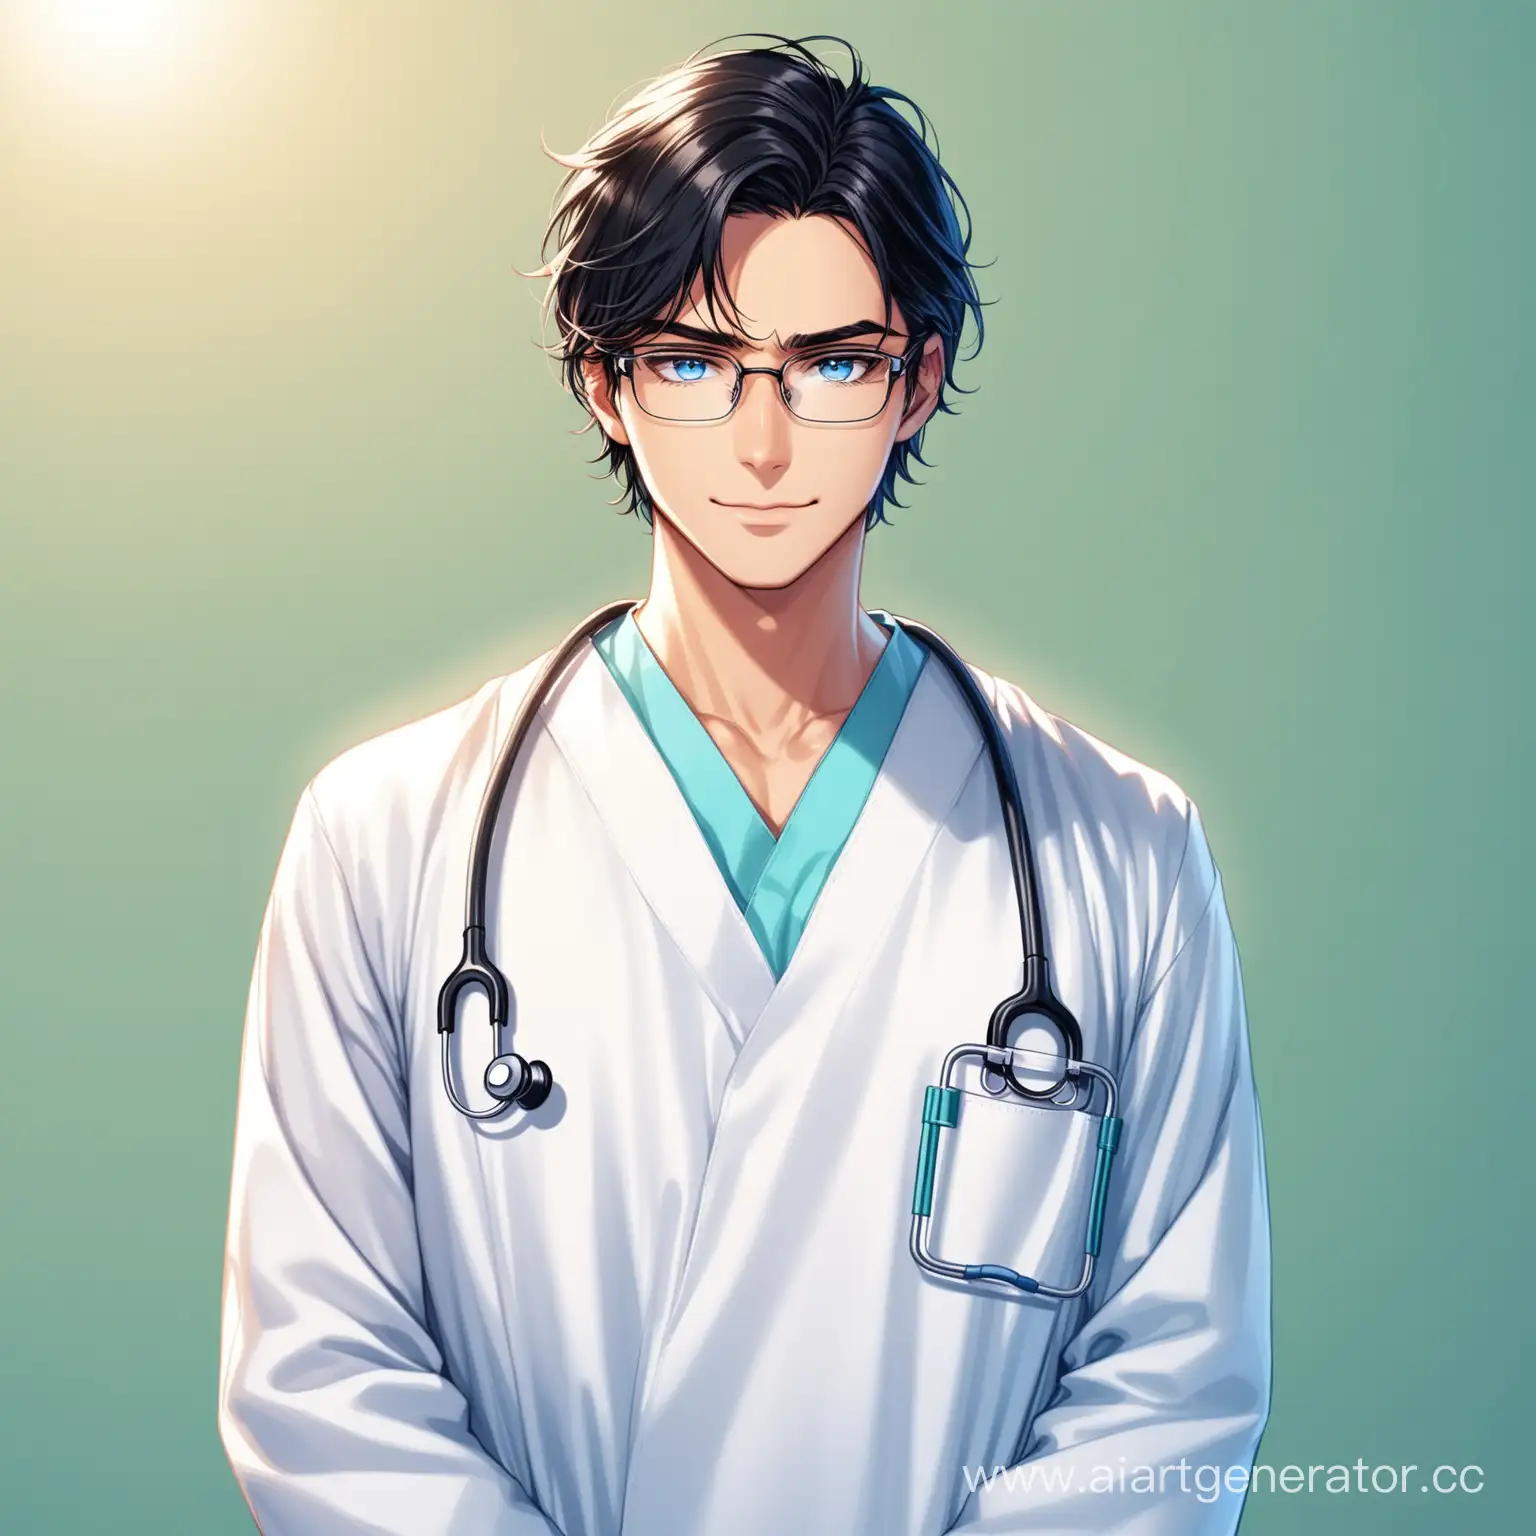 Friendly-Doctor-in-Medical-Gown-and-Glasses-with-Black-Hair-and-Blue-Eyes